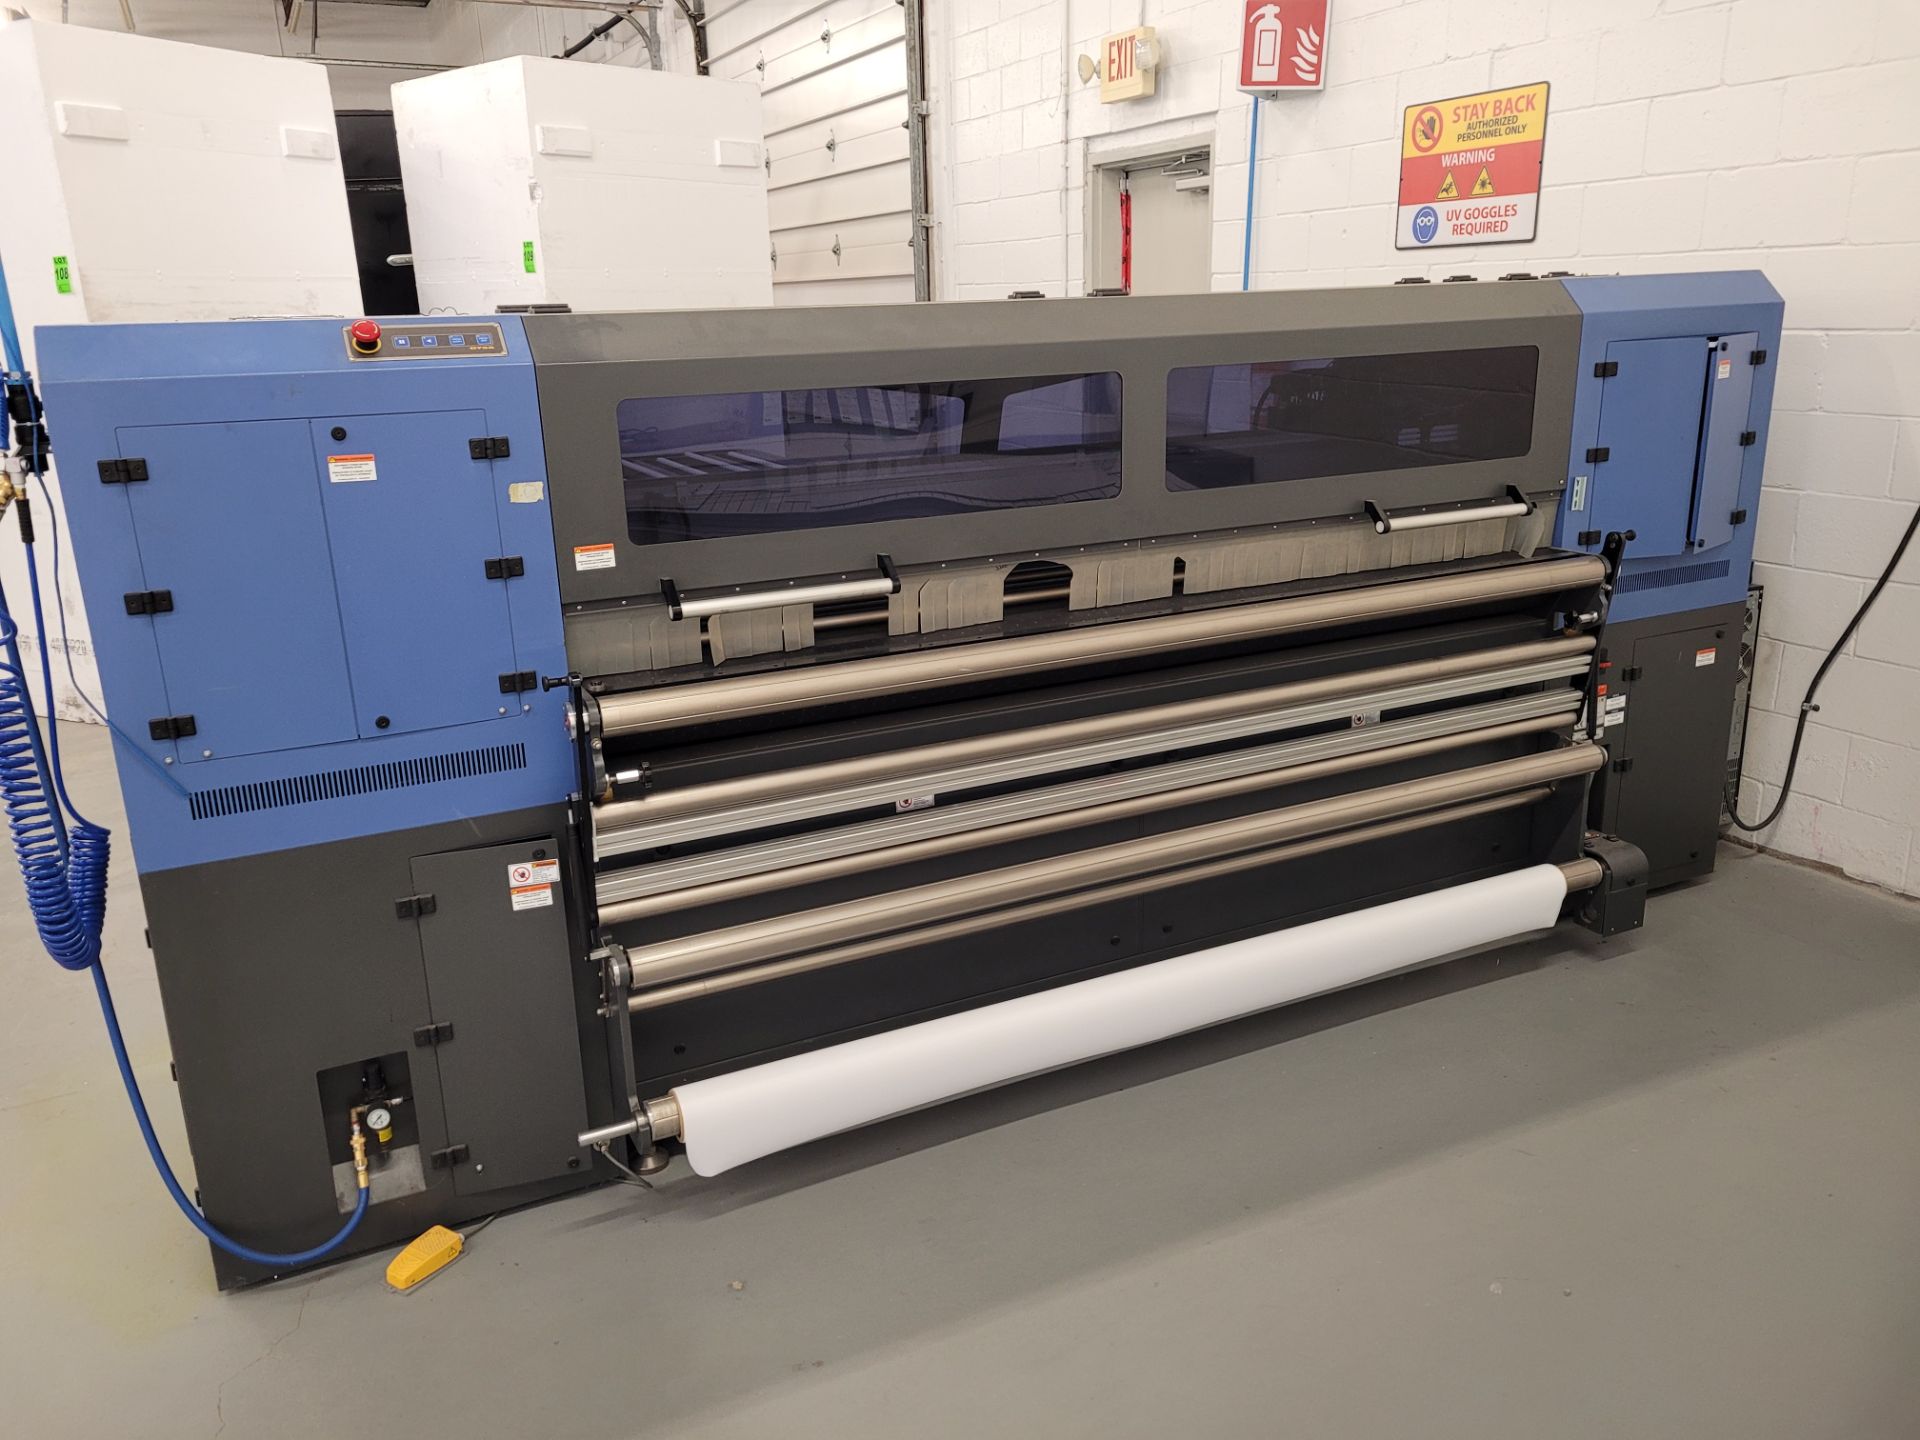 DYSS UV Printing Machine mod. Lasco & Apollo, ser. 221674RR000100264, 220V, includes conveyors and - Image 7 of 37